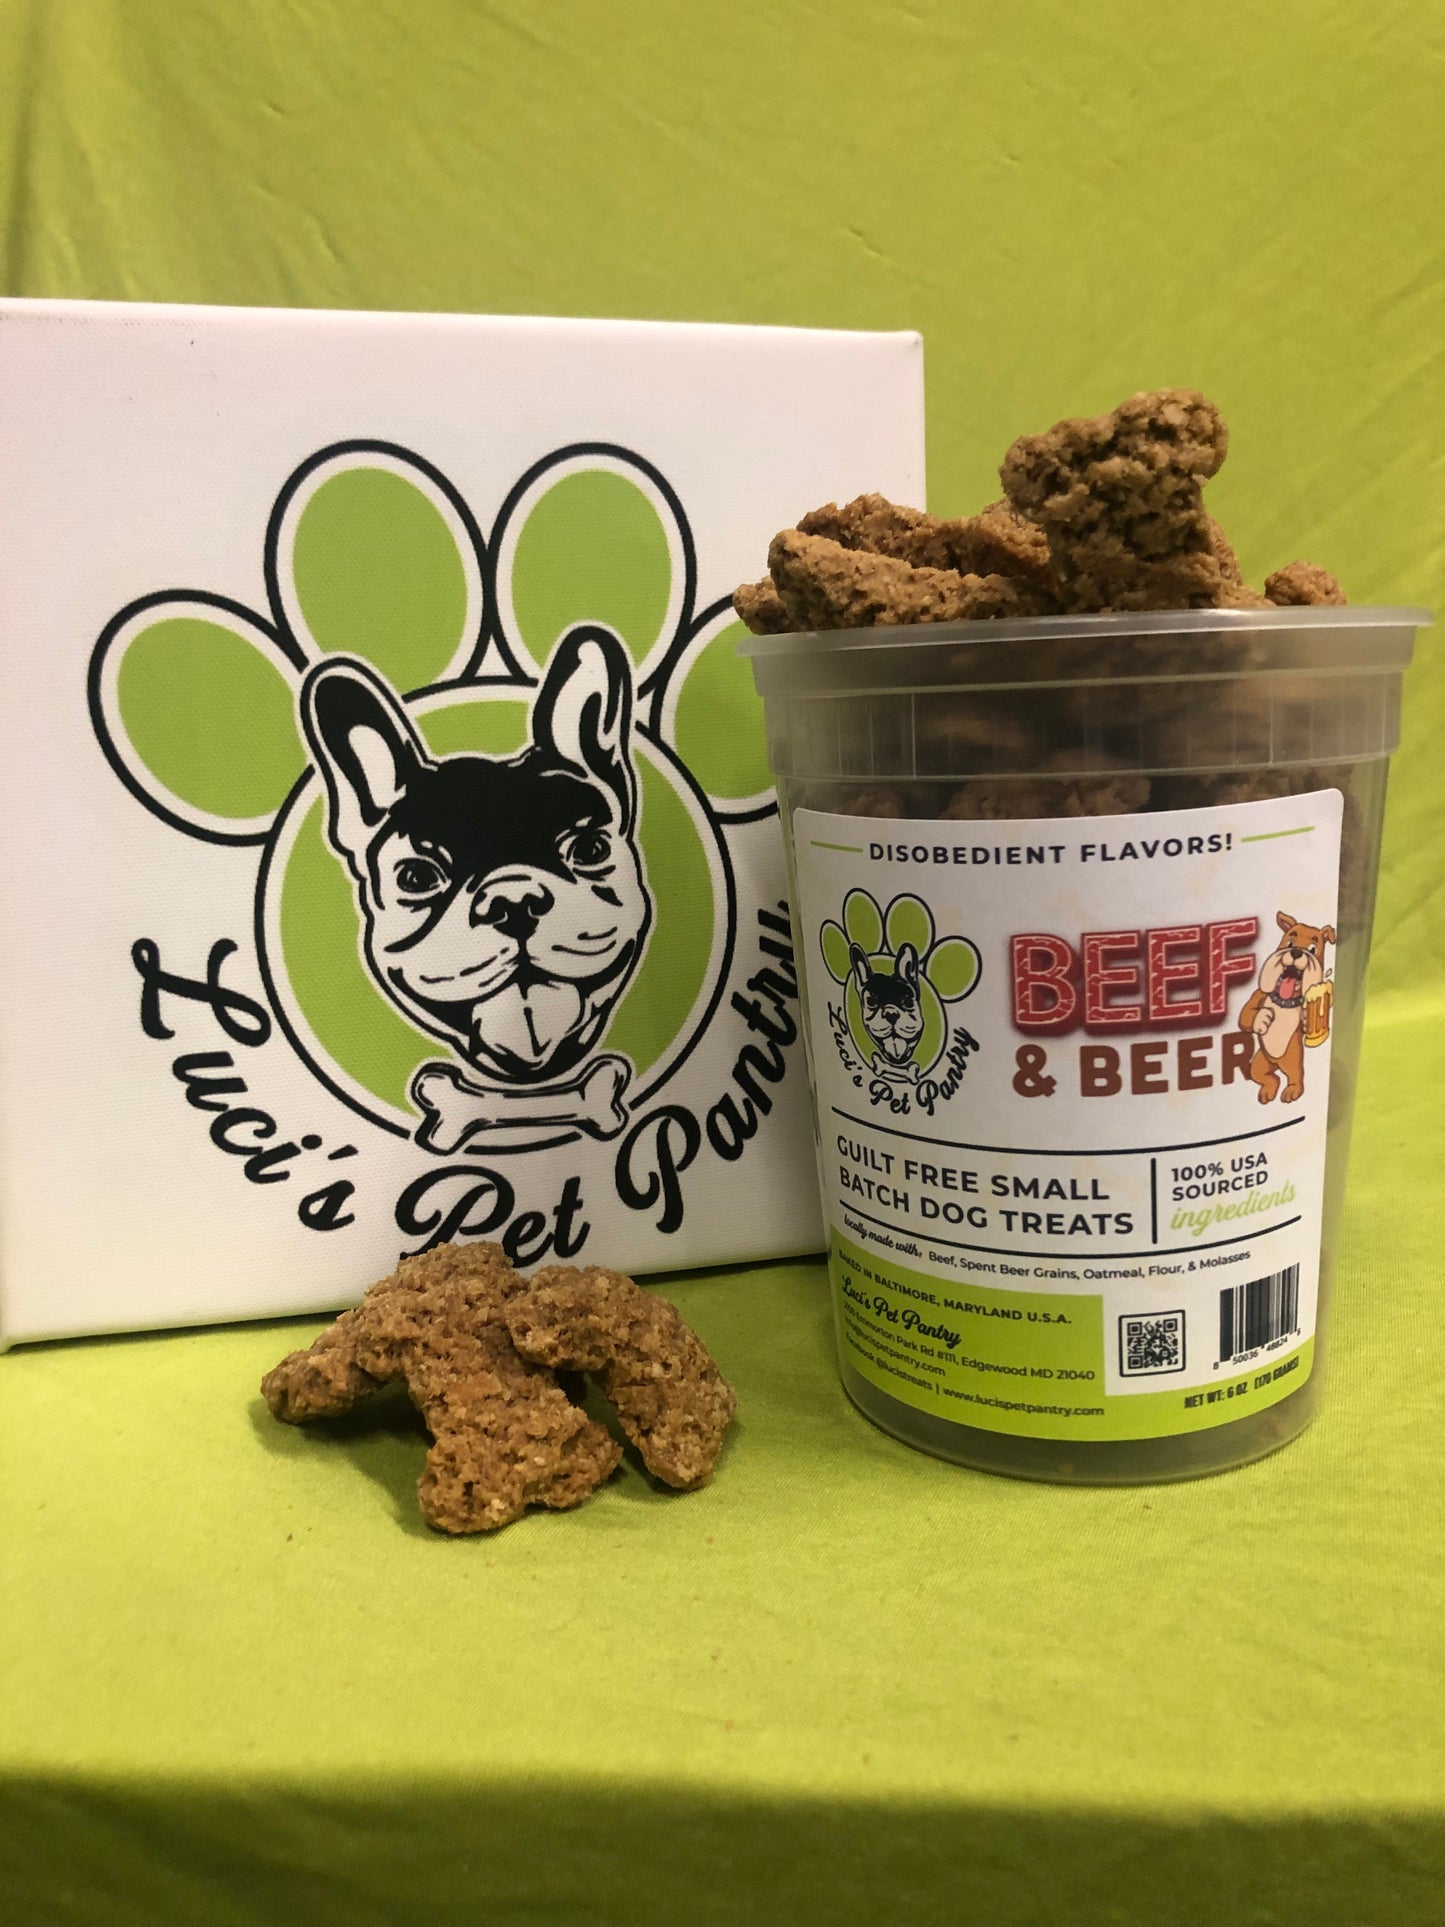 Beef & Beer - All Natural "Beef & Spent Grain" Dog & Puppy Treats - Disobedient Tub of Biscuits